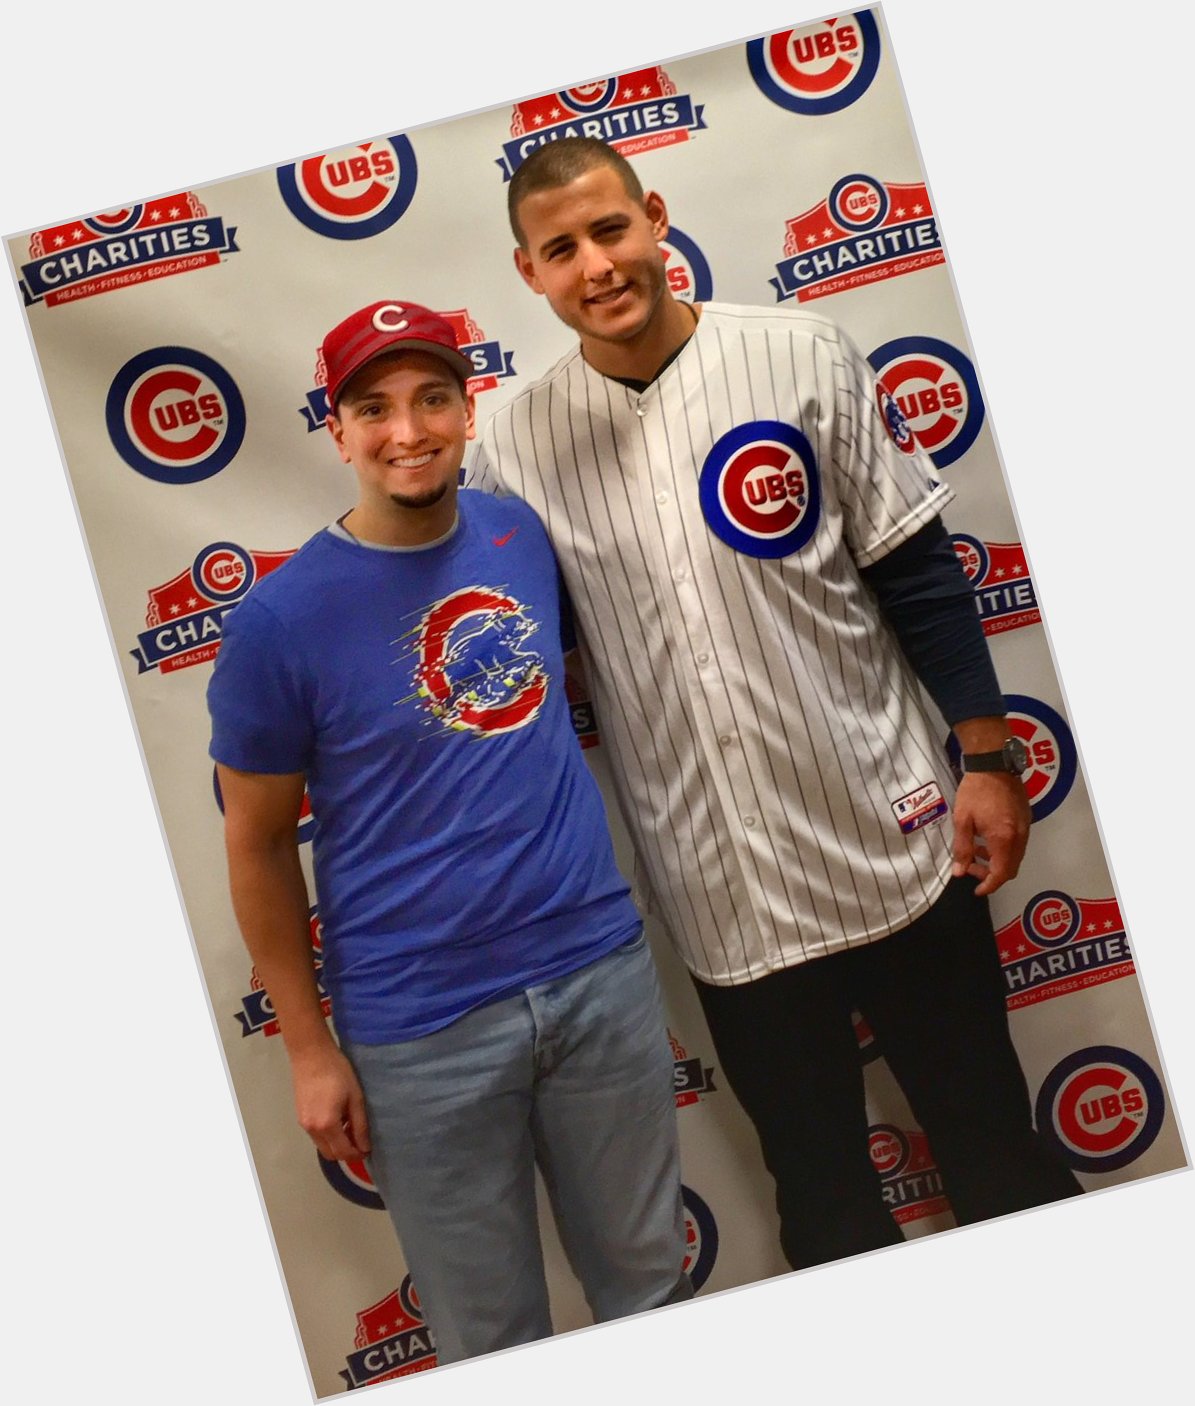 A happy birthday to Anthony Rizzo! 